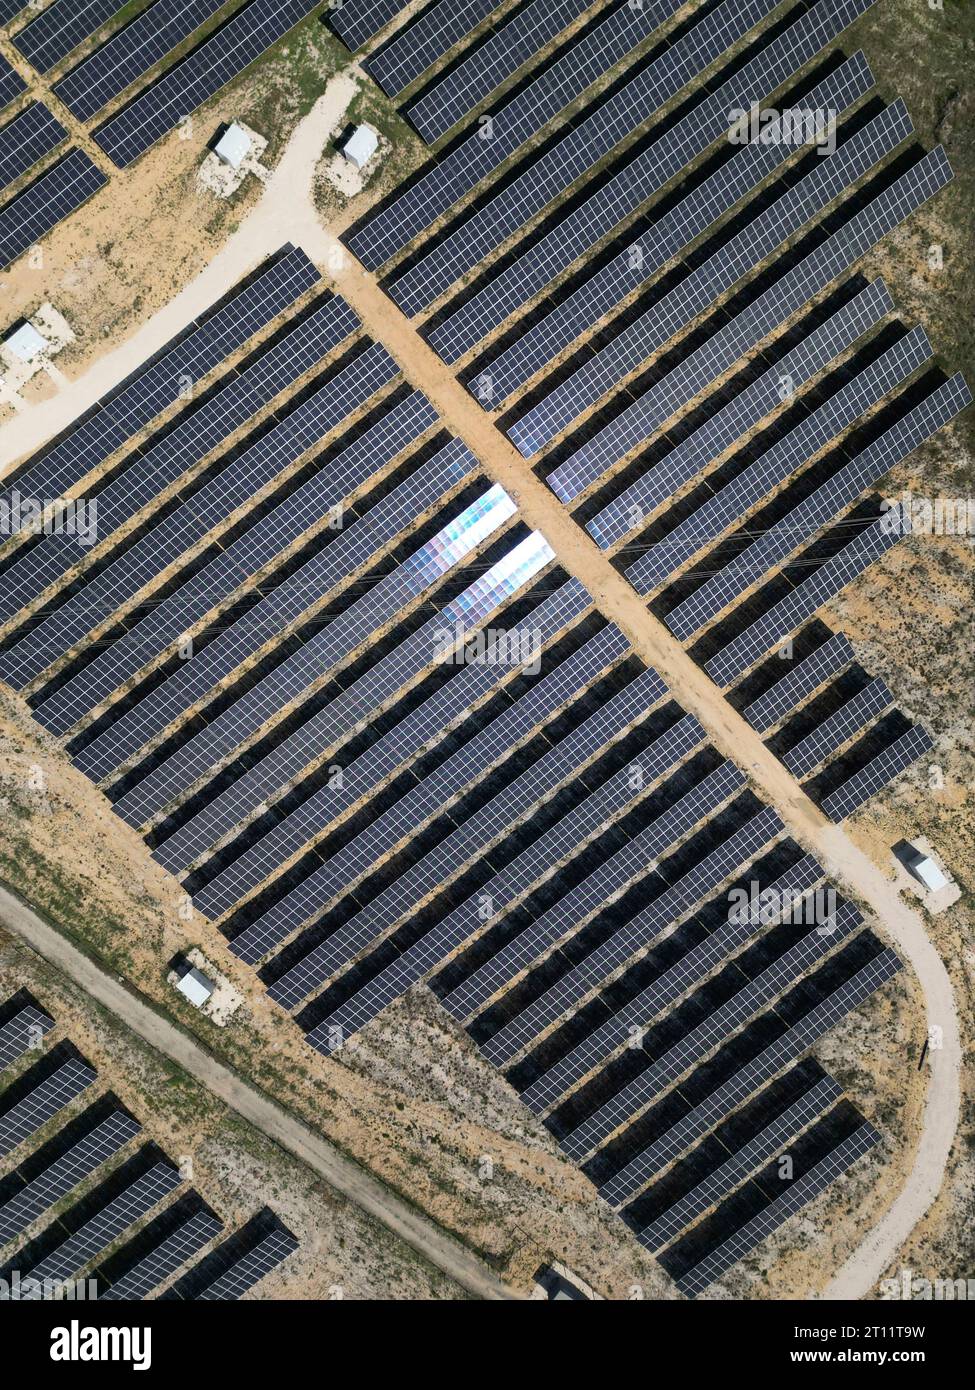 Solar panels on a photovoltaic power station Stock Photo